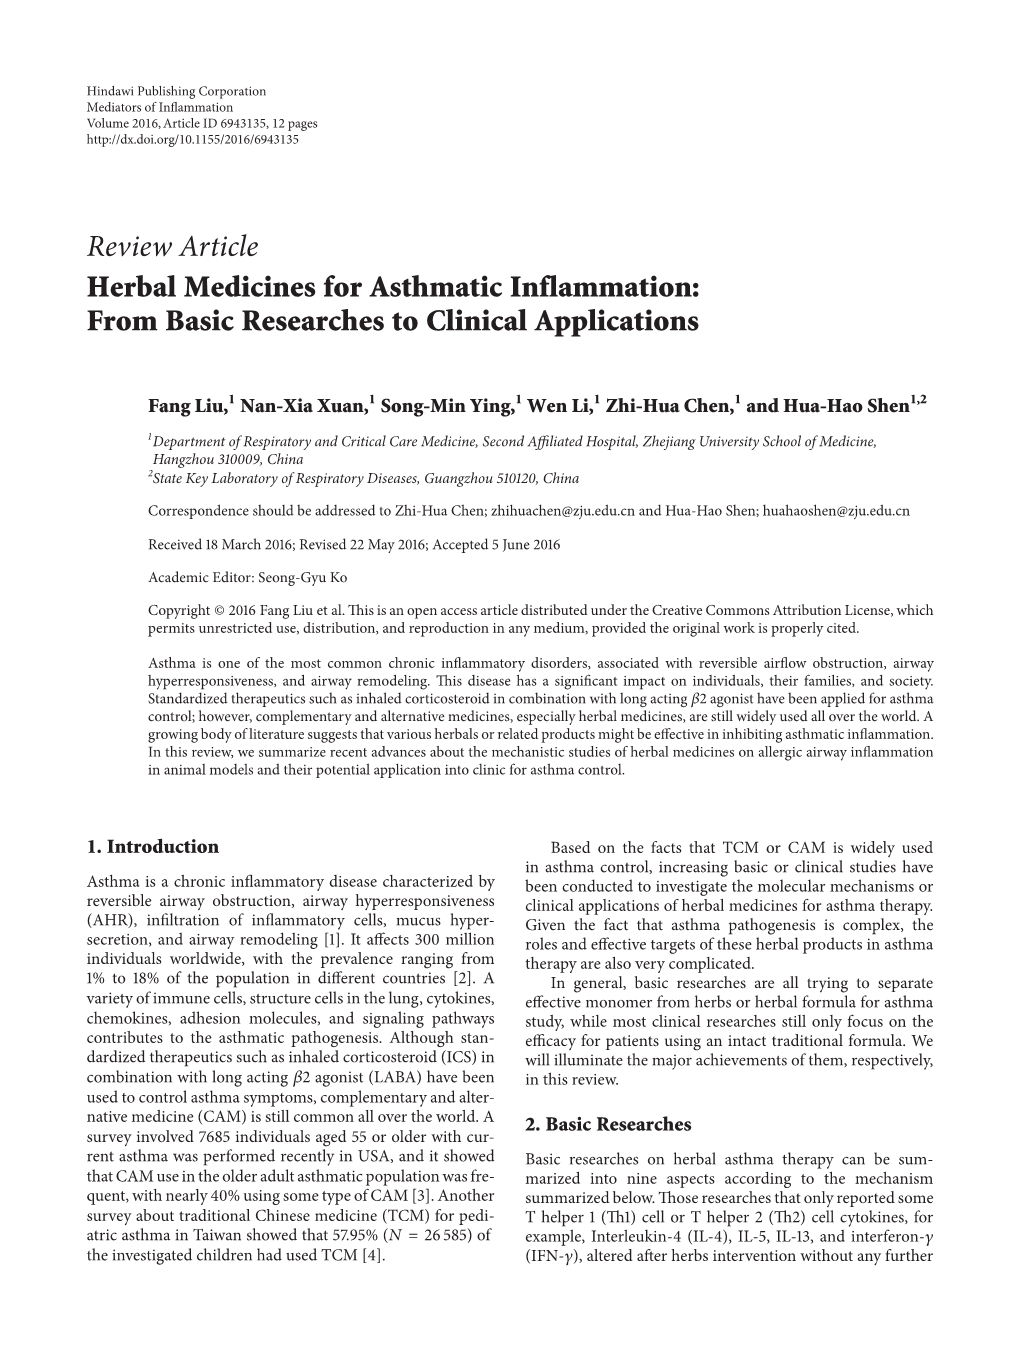 Herbal Medicines for Asthmatic Inflammation: from Basic Researches to Clinical Applications